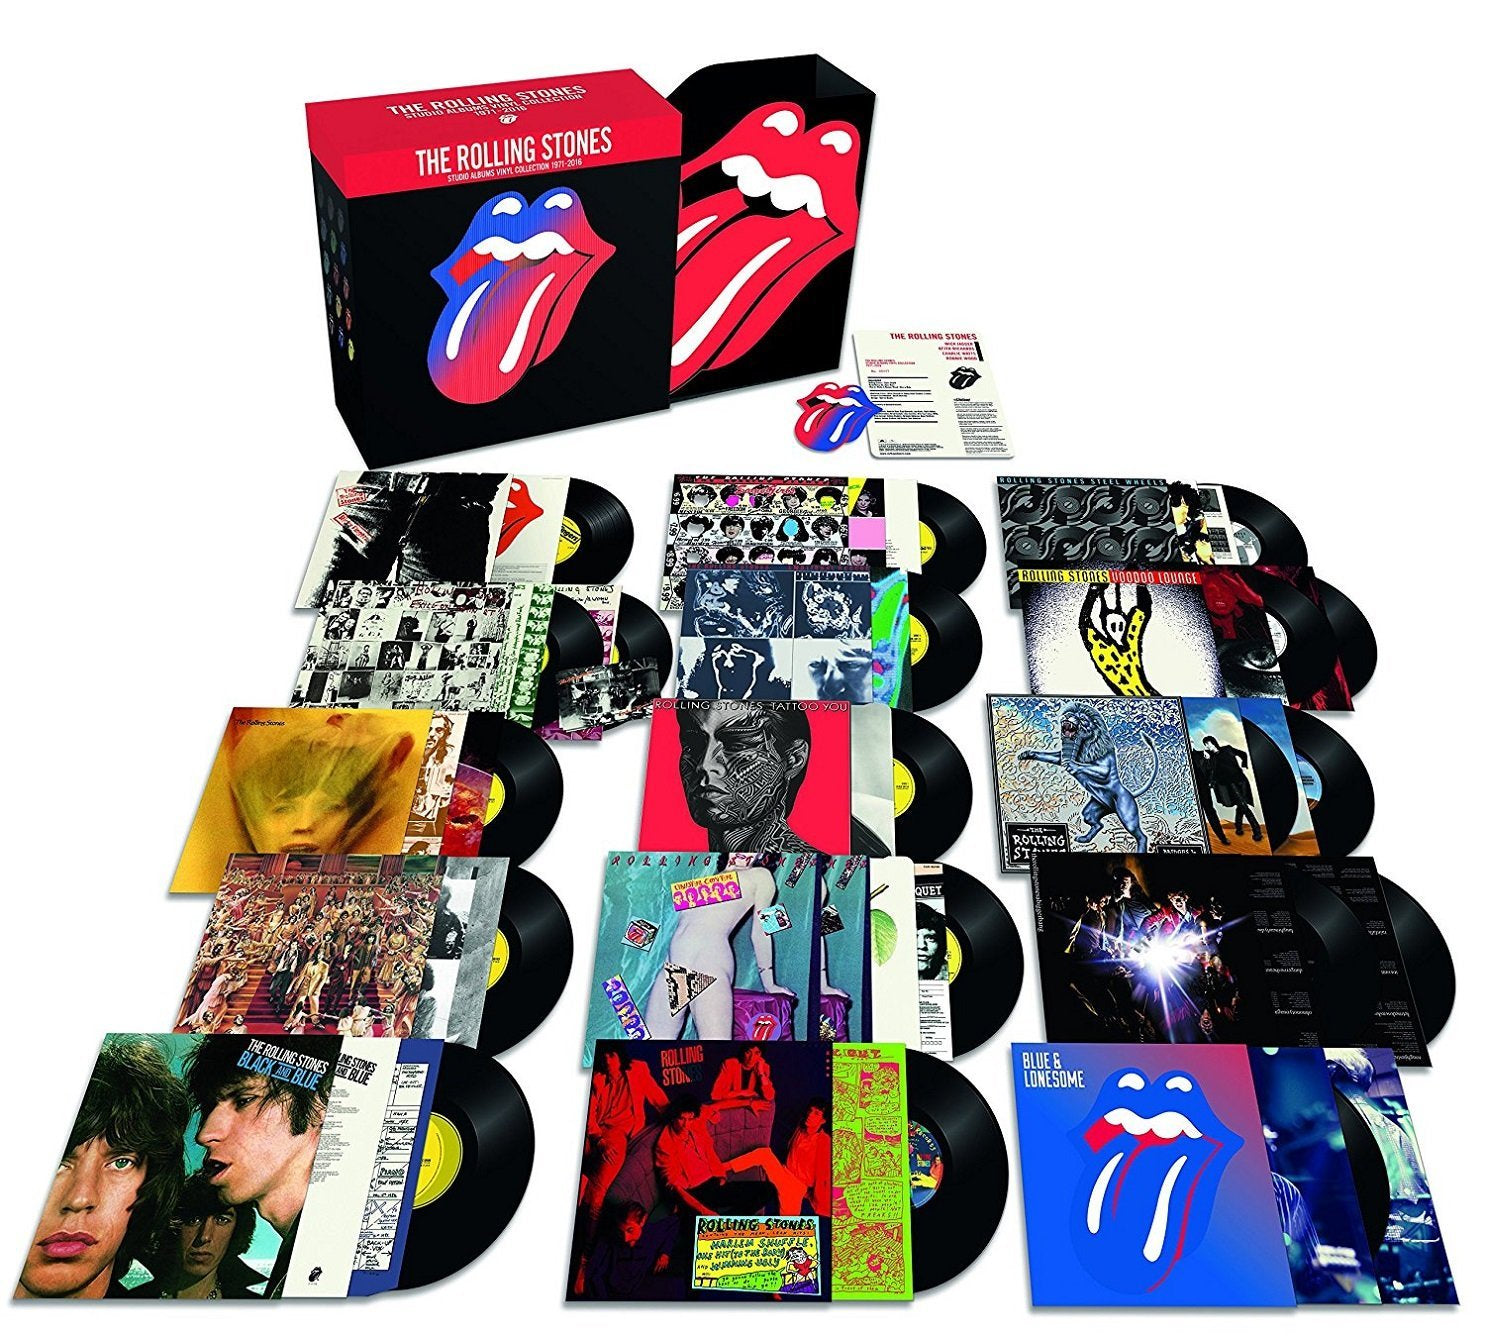 The Rolling Stones -  Studio Albums Collection (1971 - 2016) - New 15 Lp Record 2018 Polydor USA 180 gram Box Set - Rock & Roll